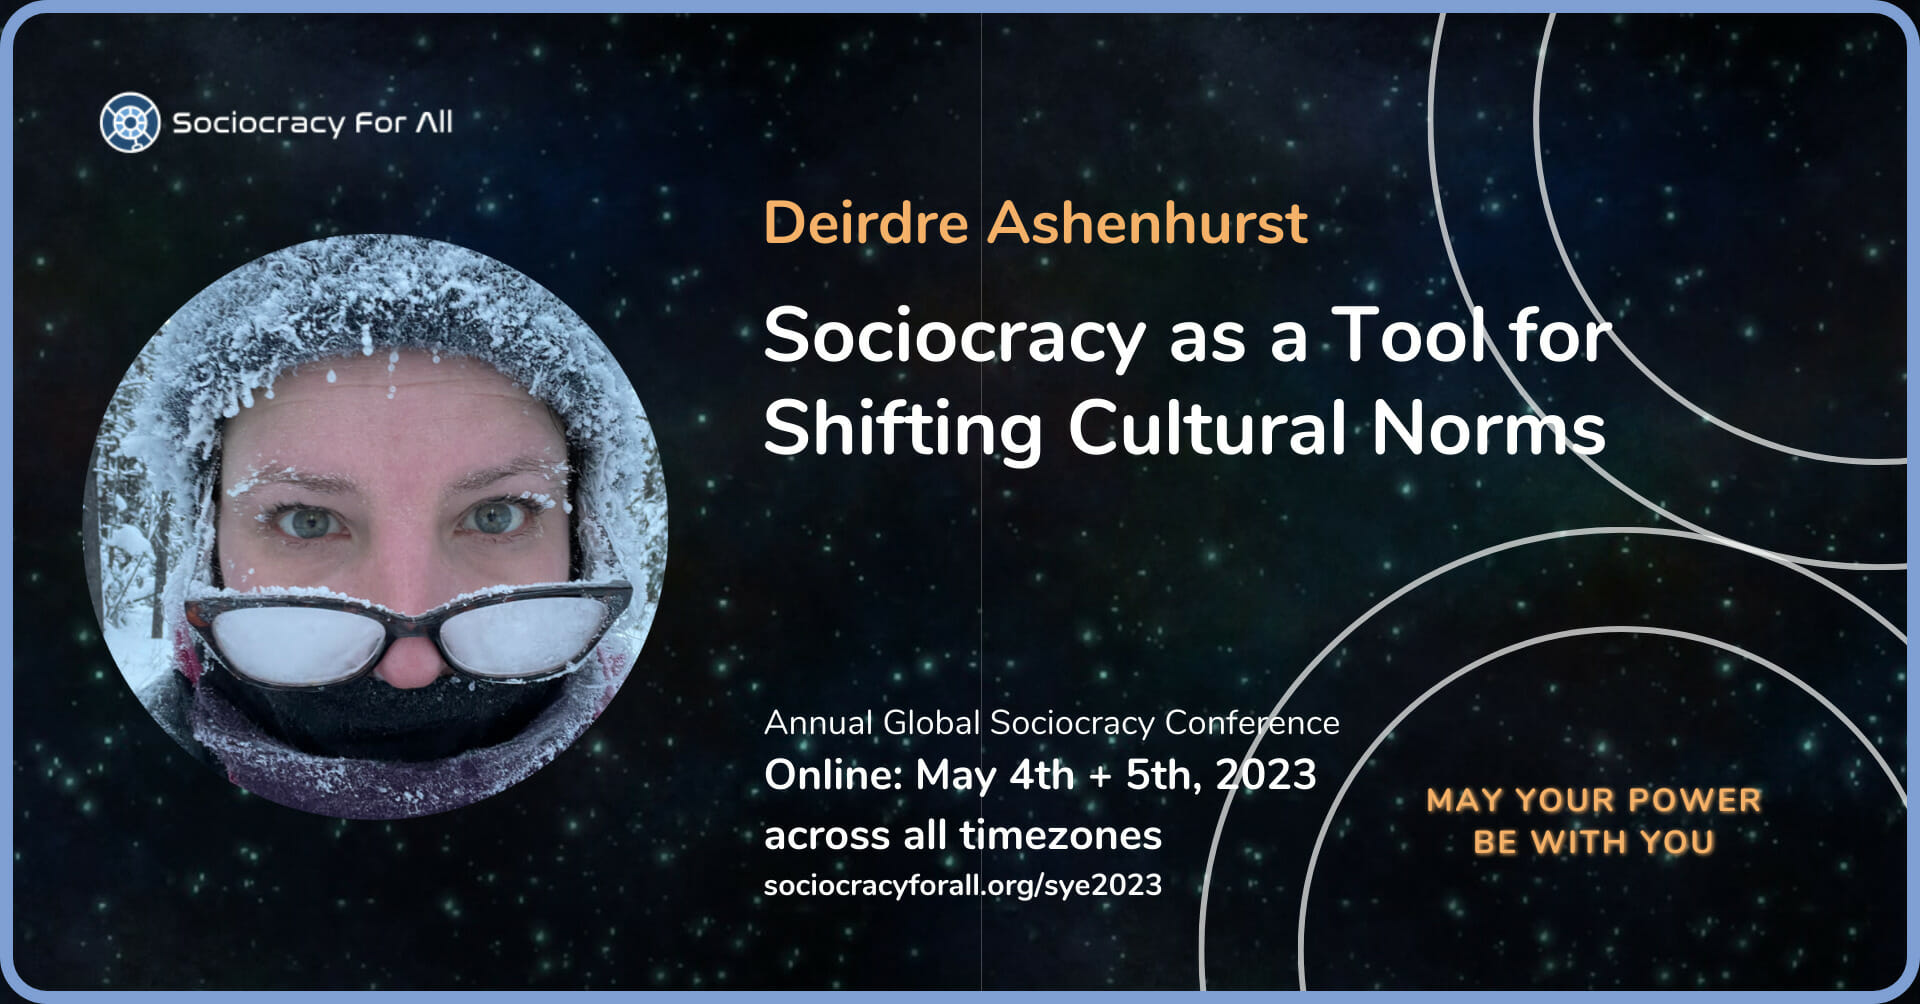 Sociocracy as a Tool for Shifting Cultural Norms